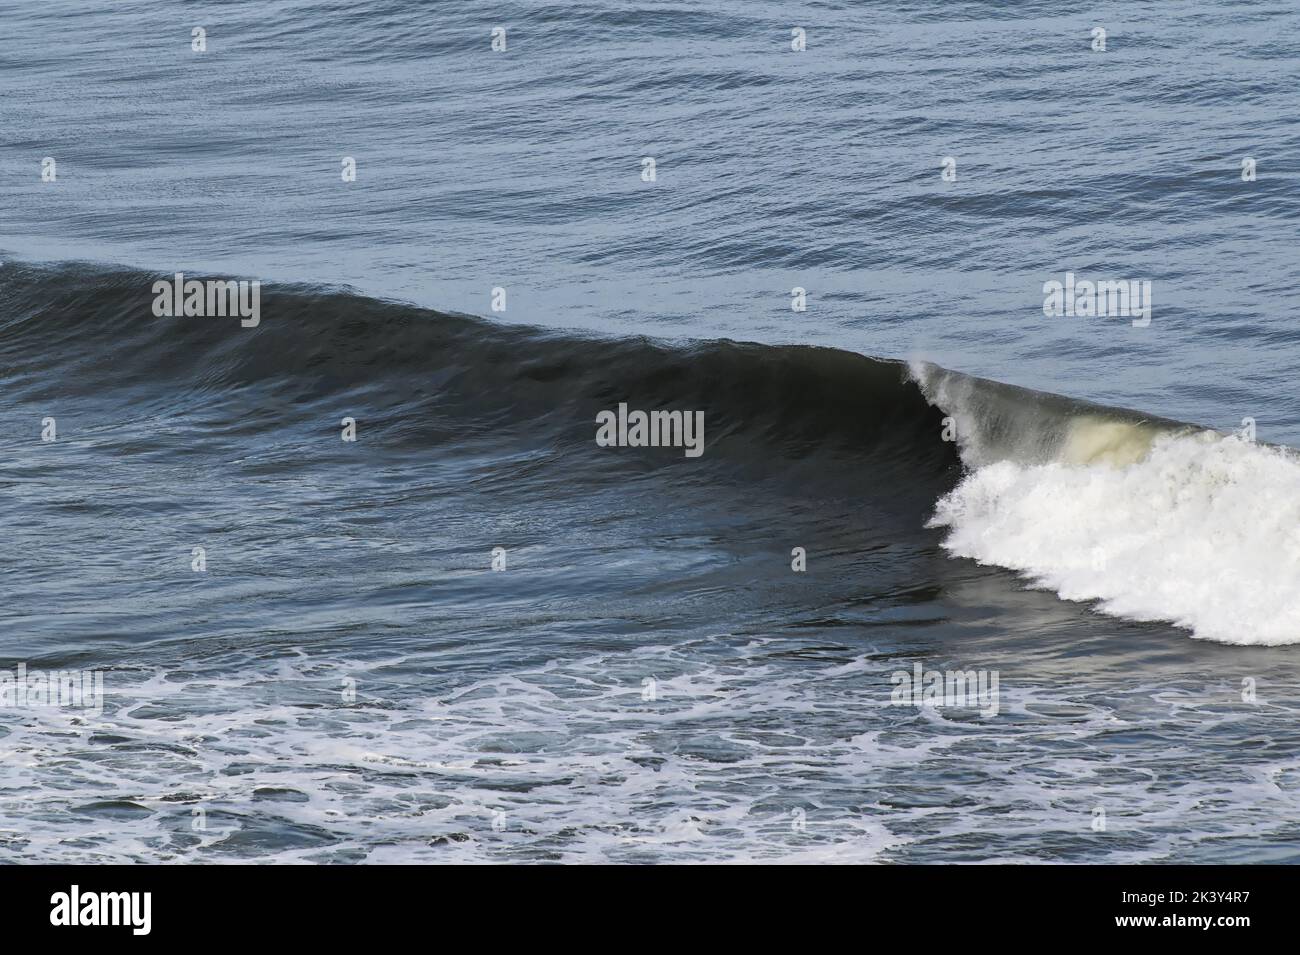 Wave crests then rolls down the face of the wave, throwing spray off the top. Stock Photo